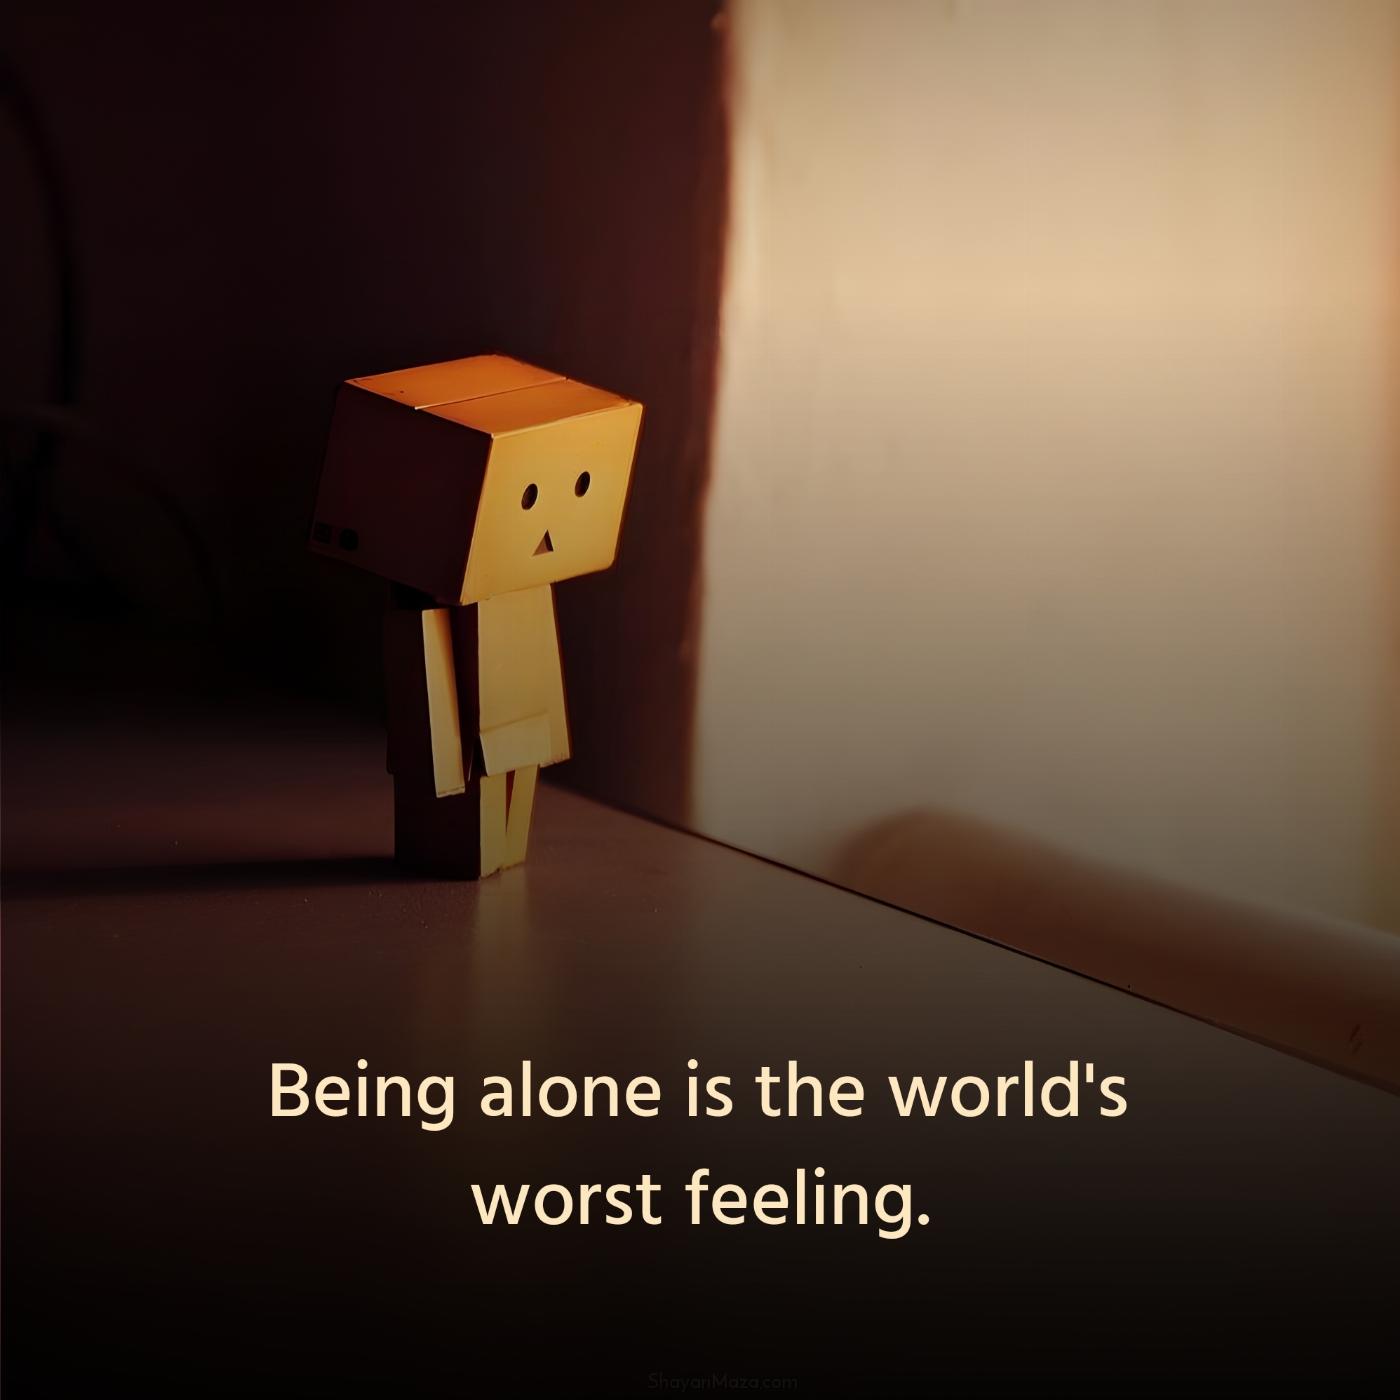 Being alone is the world's worst feeling